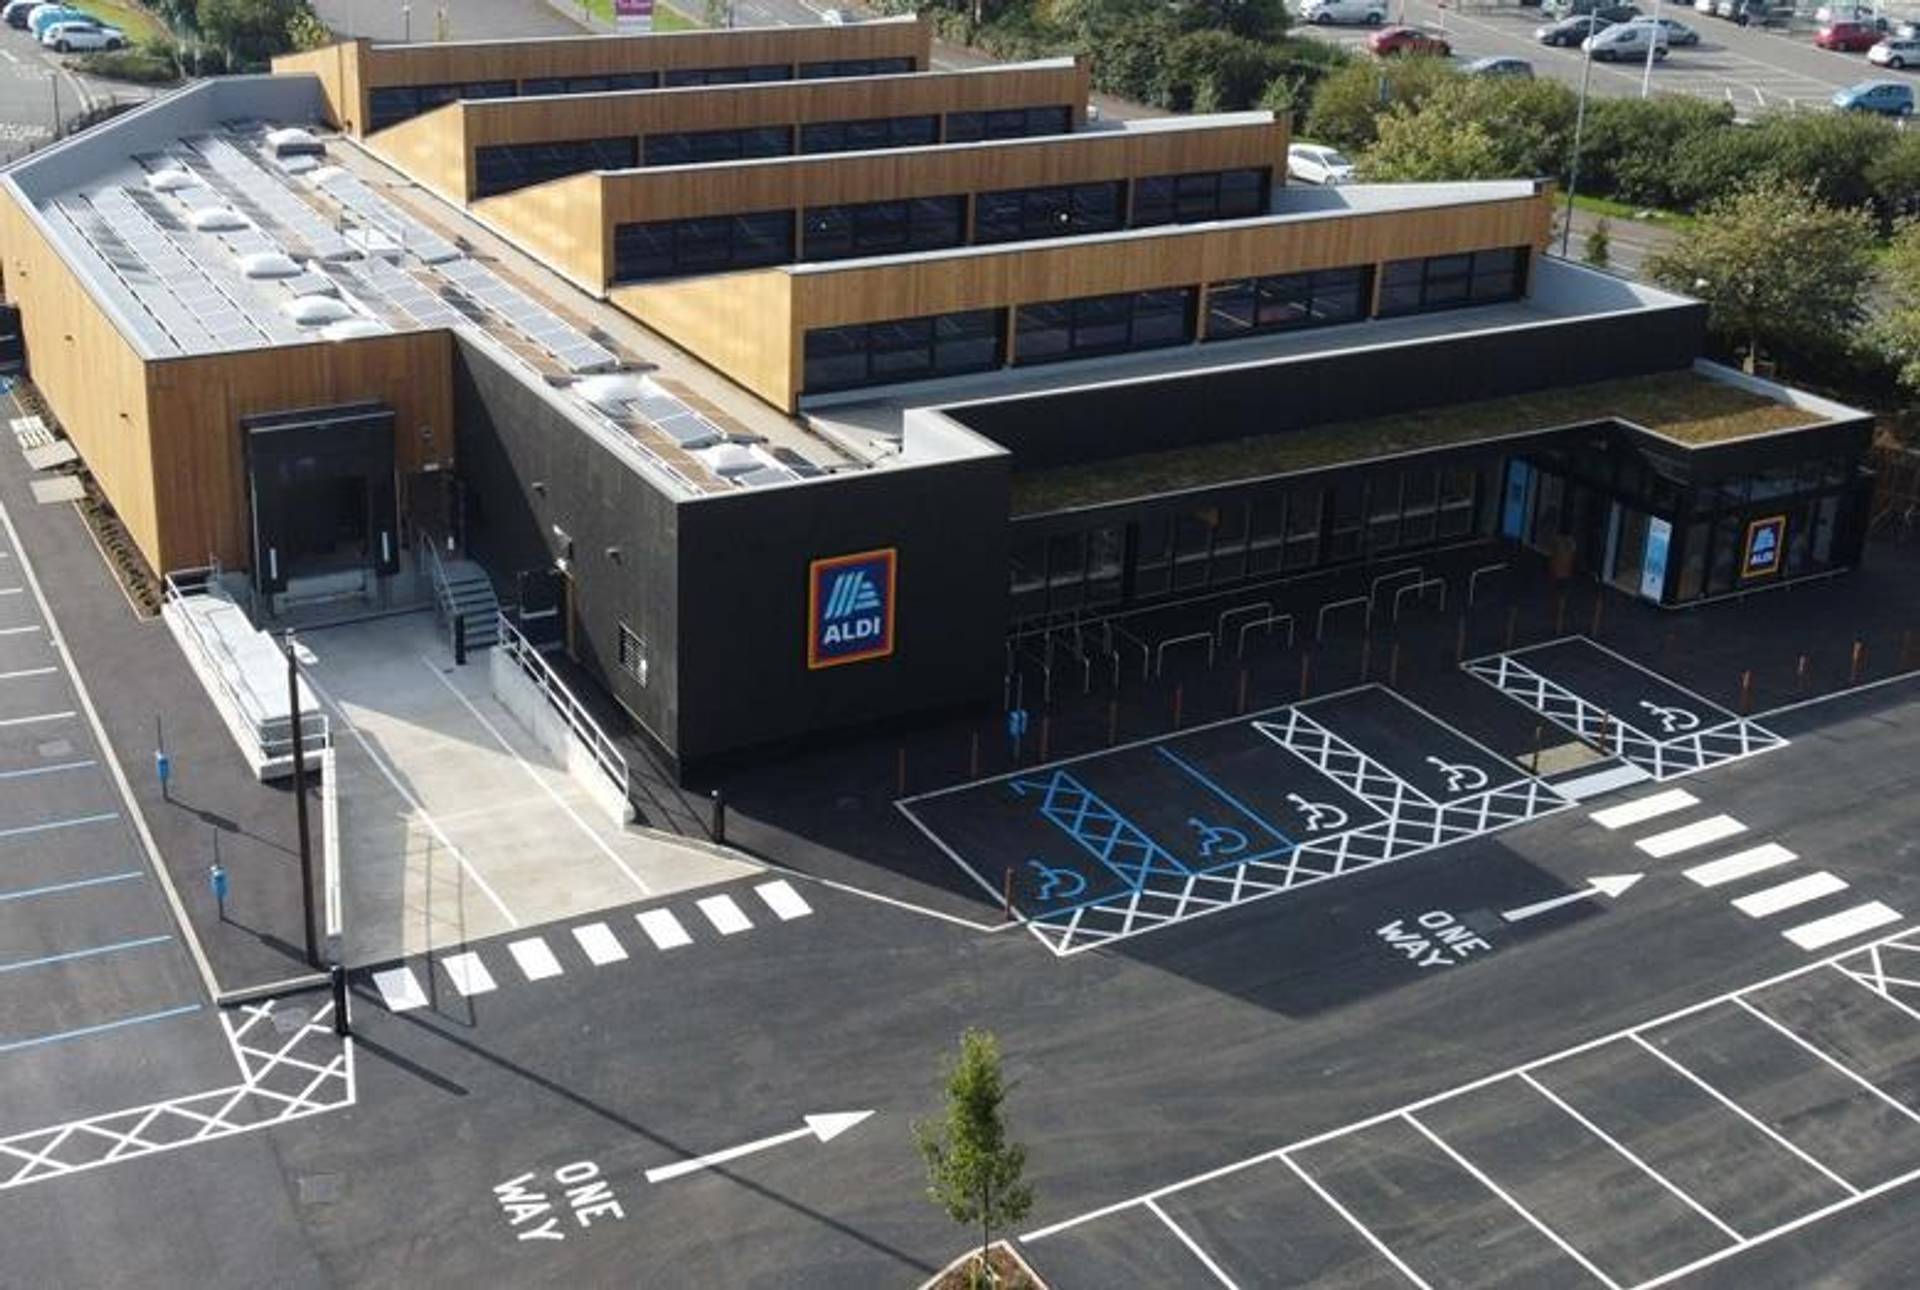 Aldi's 'eco store' offers sustainability on a budget